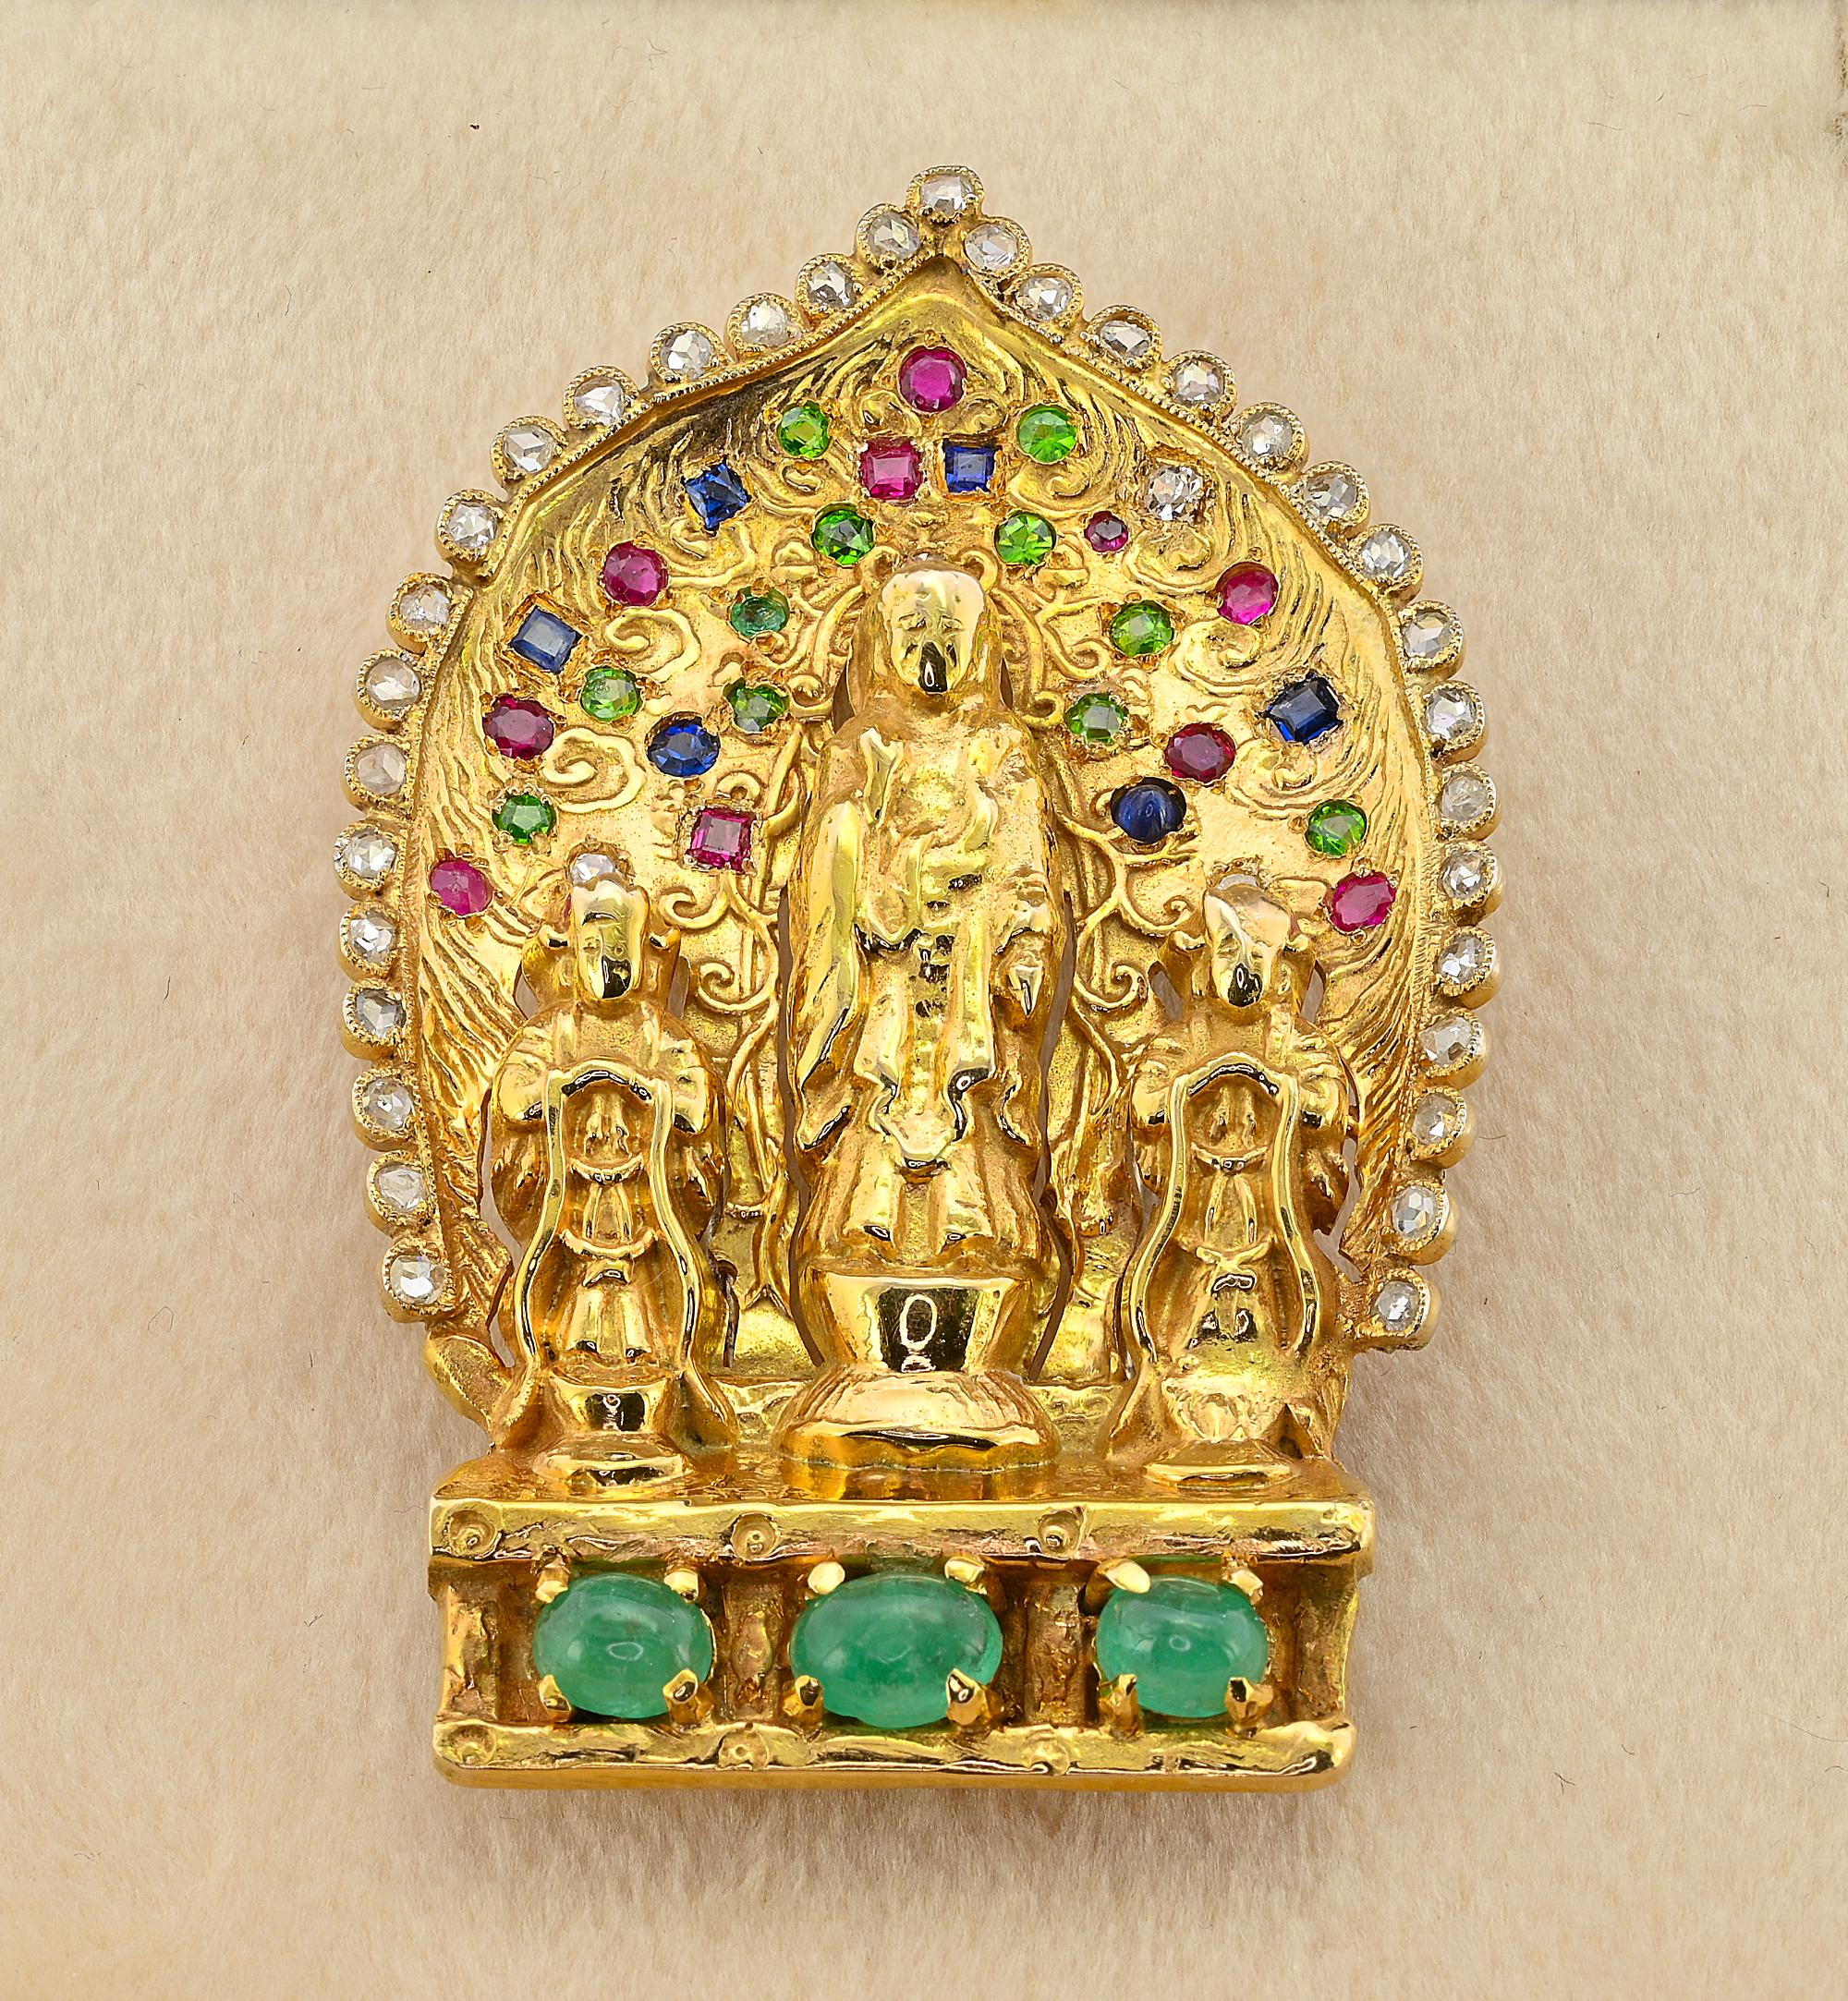 A stunning vintage brooch 1940 circa, signed Seaman Schepps
Rare example of the early Seaman Schepps jewelry, hand crafted of solid 18 Kt
Amazingly modeled as an Indian Divinity temple, the God standing between two monks with colored gem-set